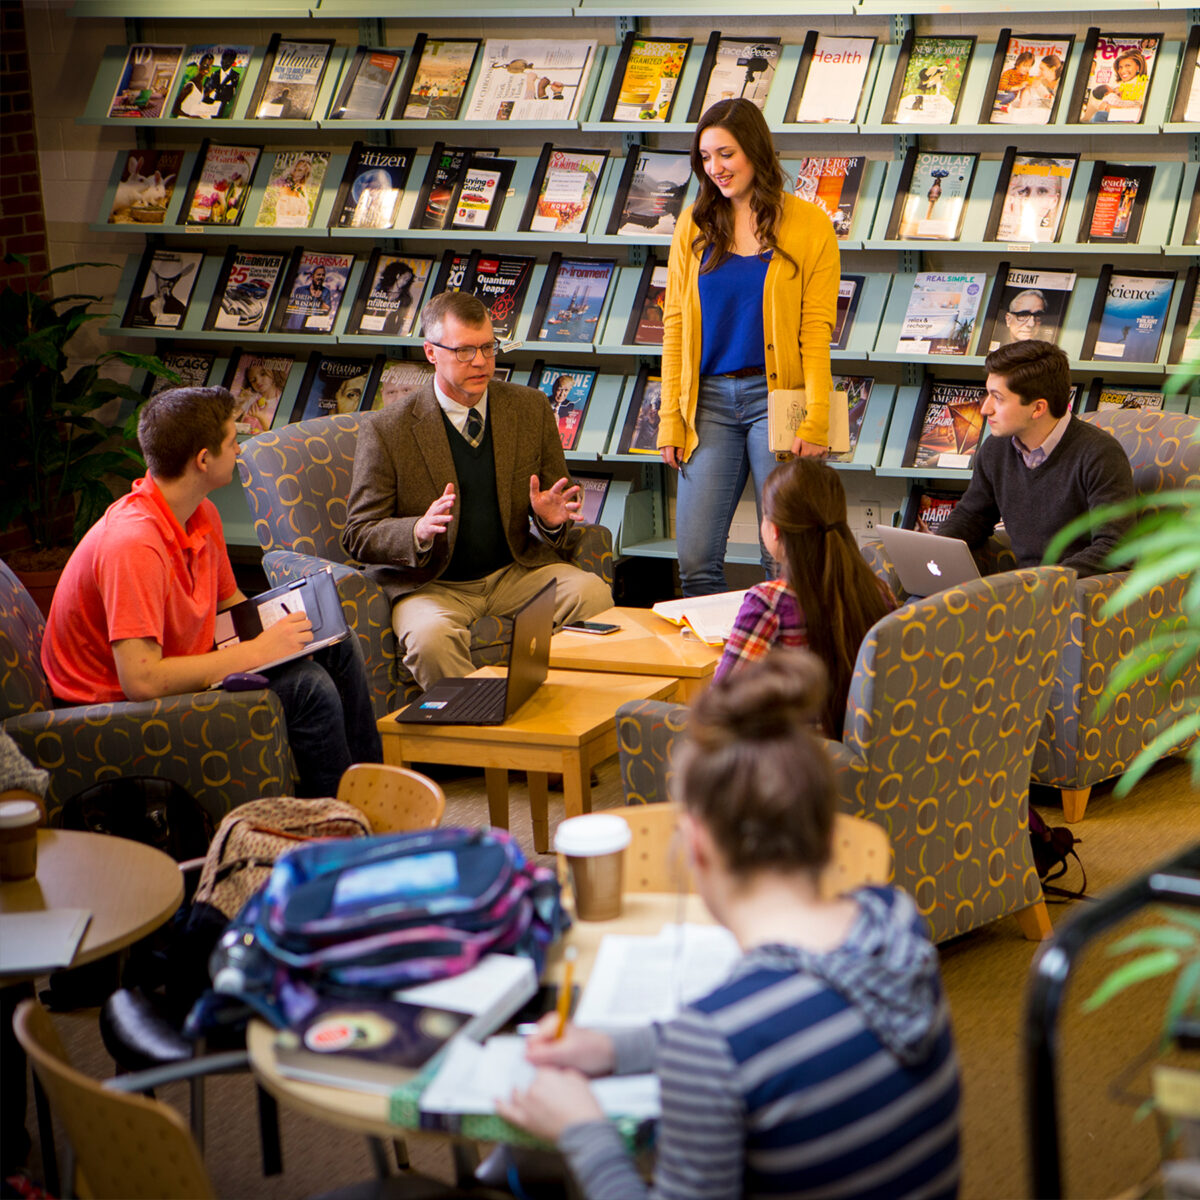 Professor talking with students in Benner Library